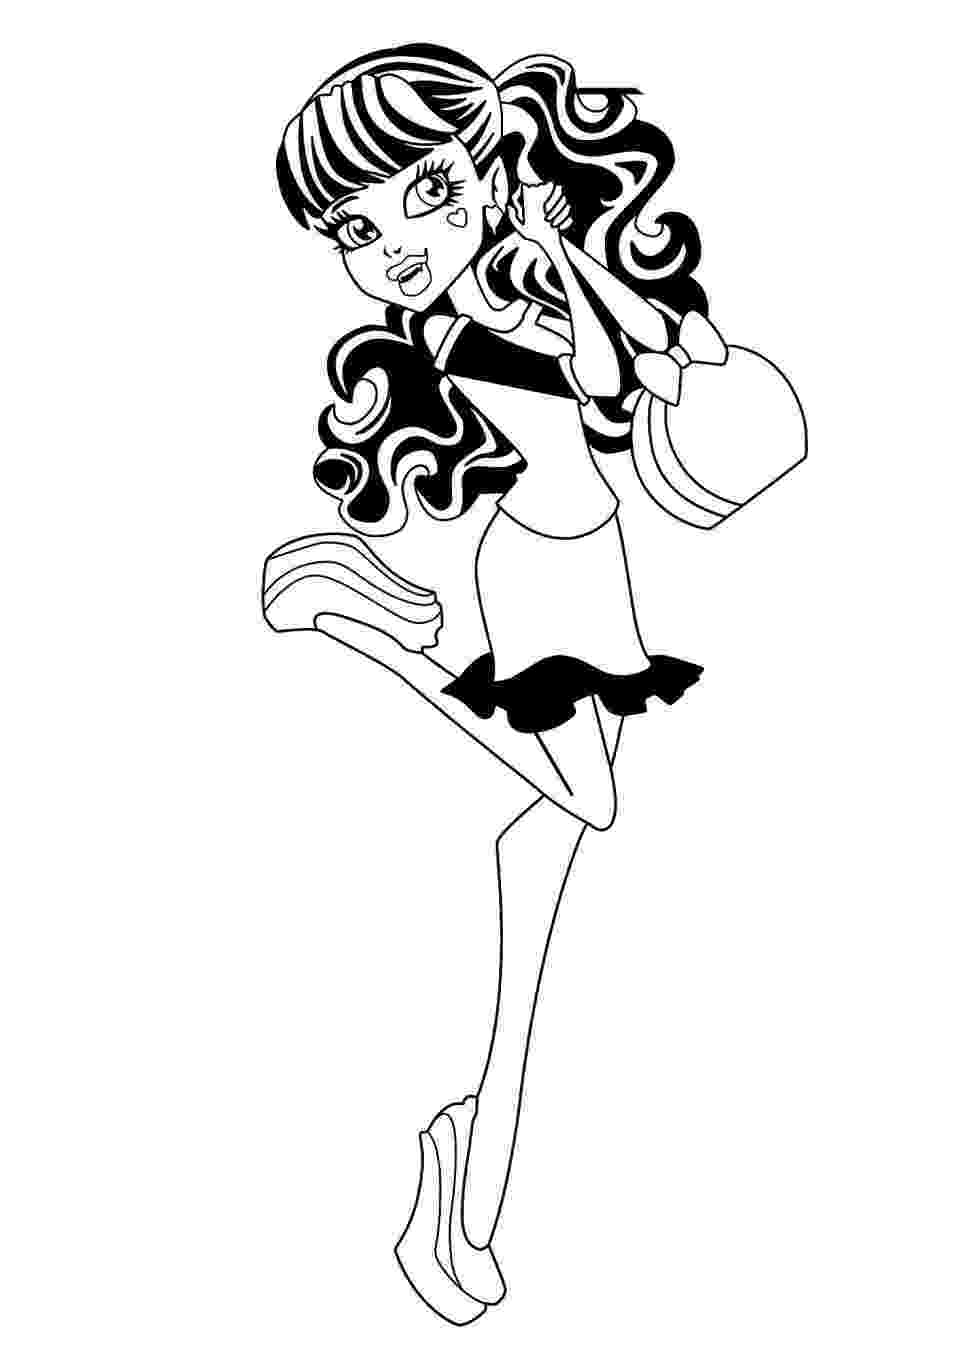 monster high free colouring pages monster high coloring pages free download best monster monster free high colouring pages 